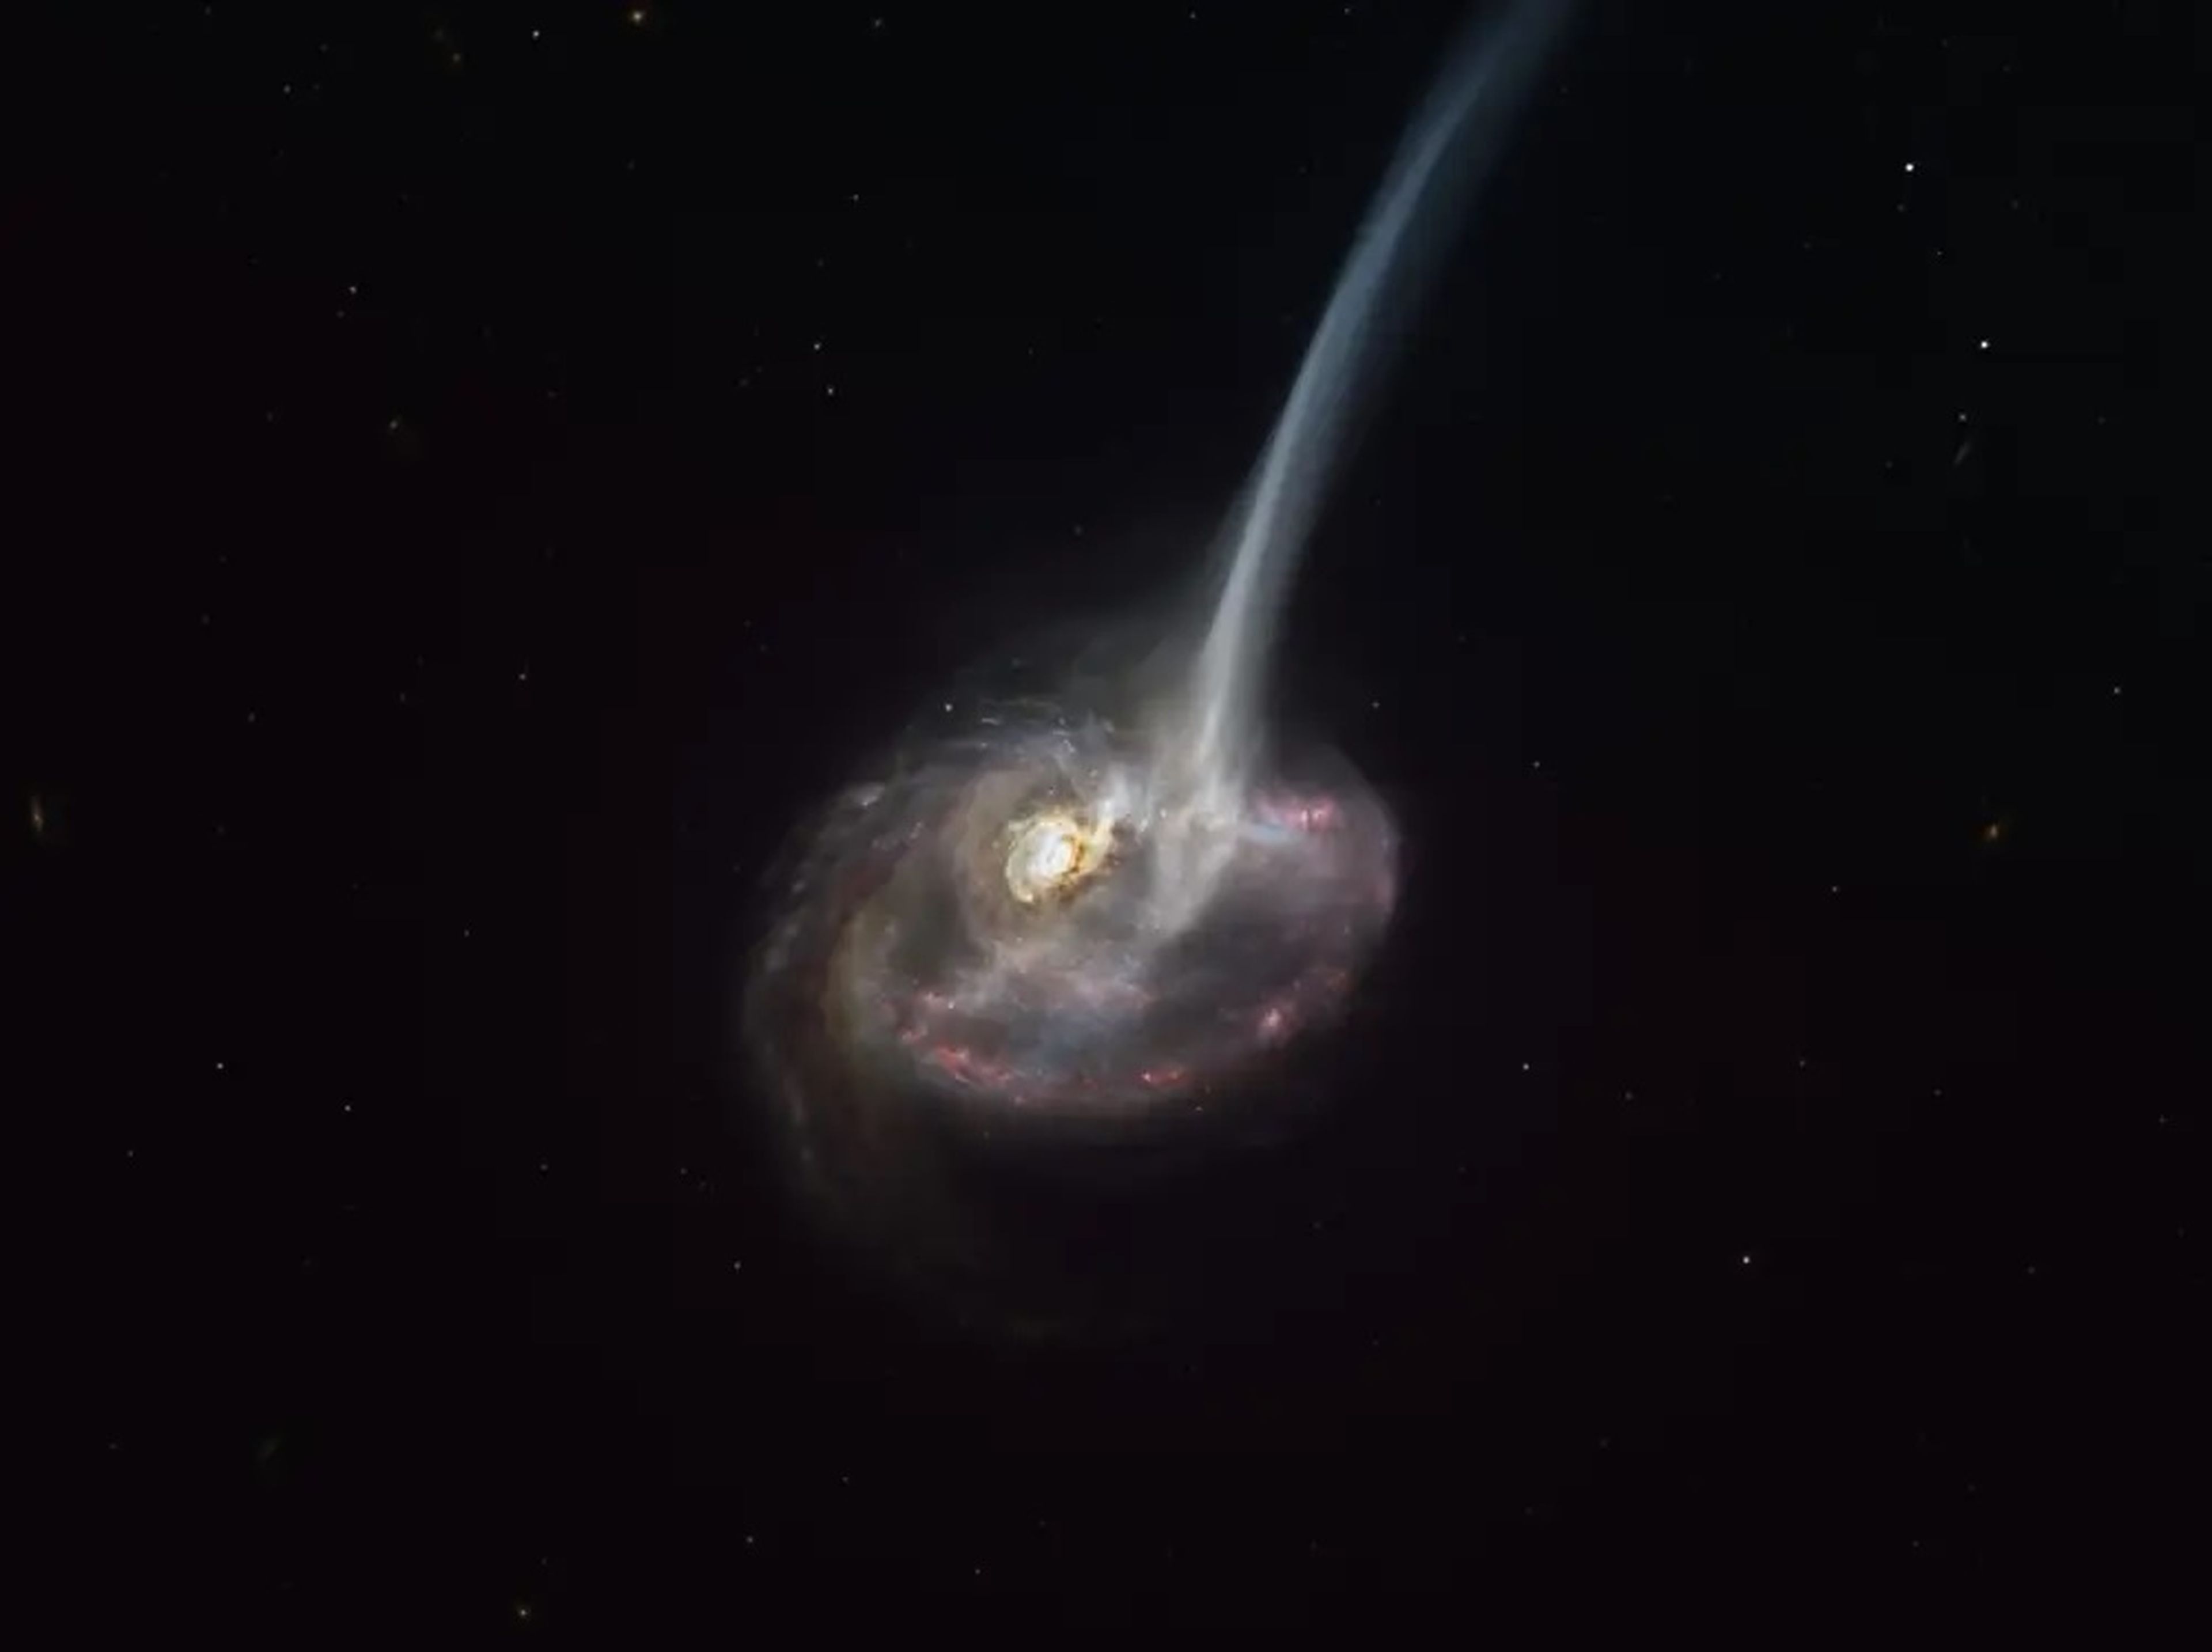 An artist's impression shows galaxy ID2299 losing a tail of gas after being formed in a galactic collision